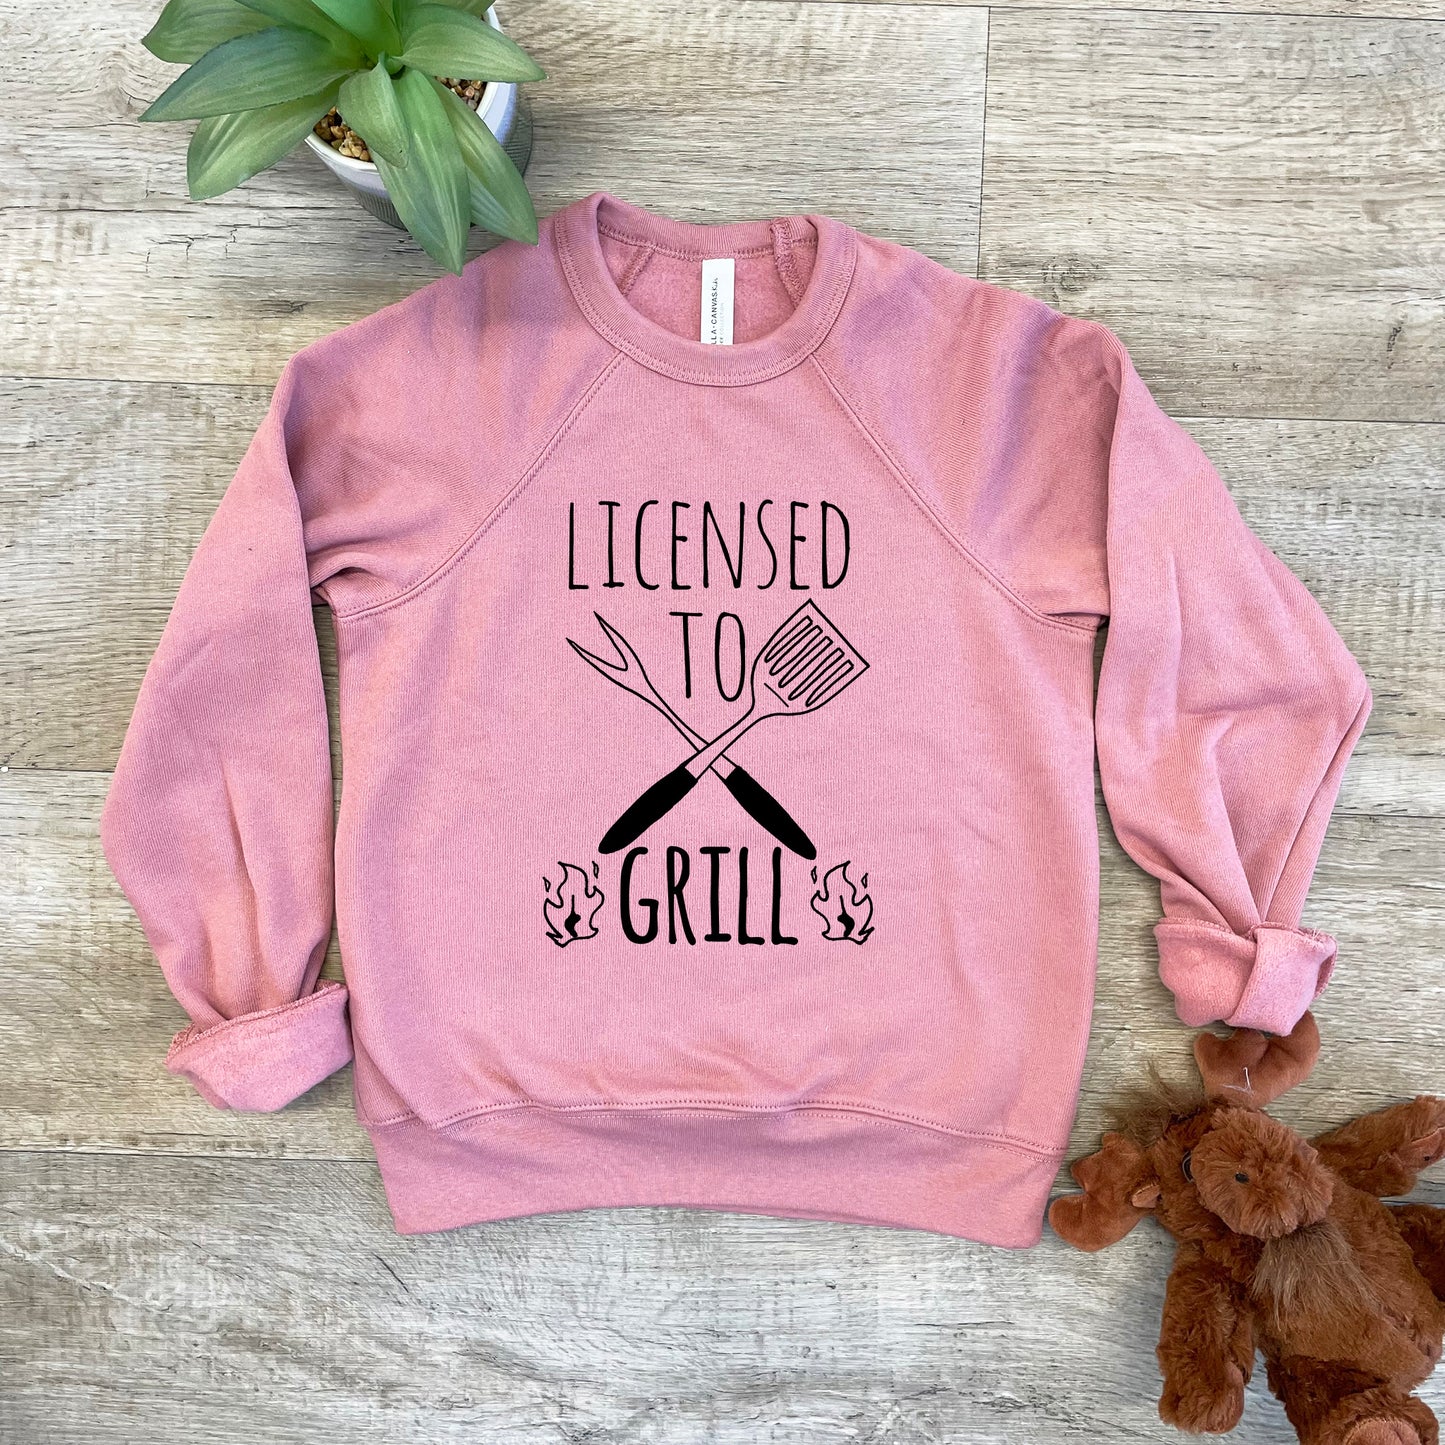 Licensed To Grill - Kid's Sweatshirt - Heather Gray or Mauve